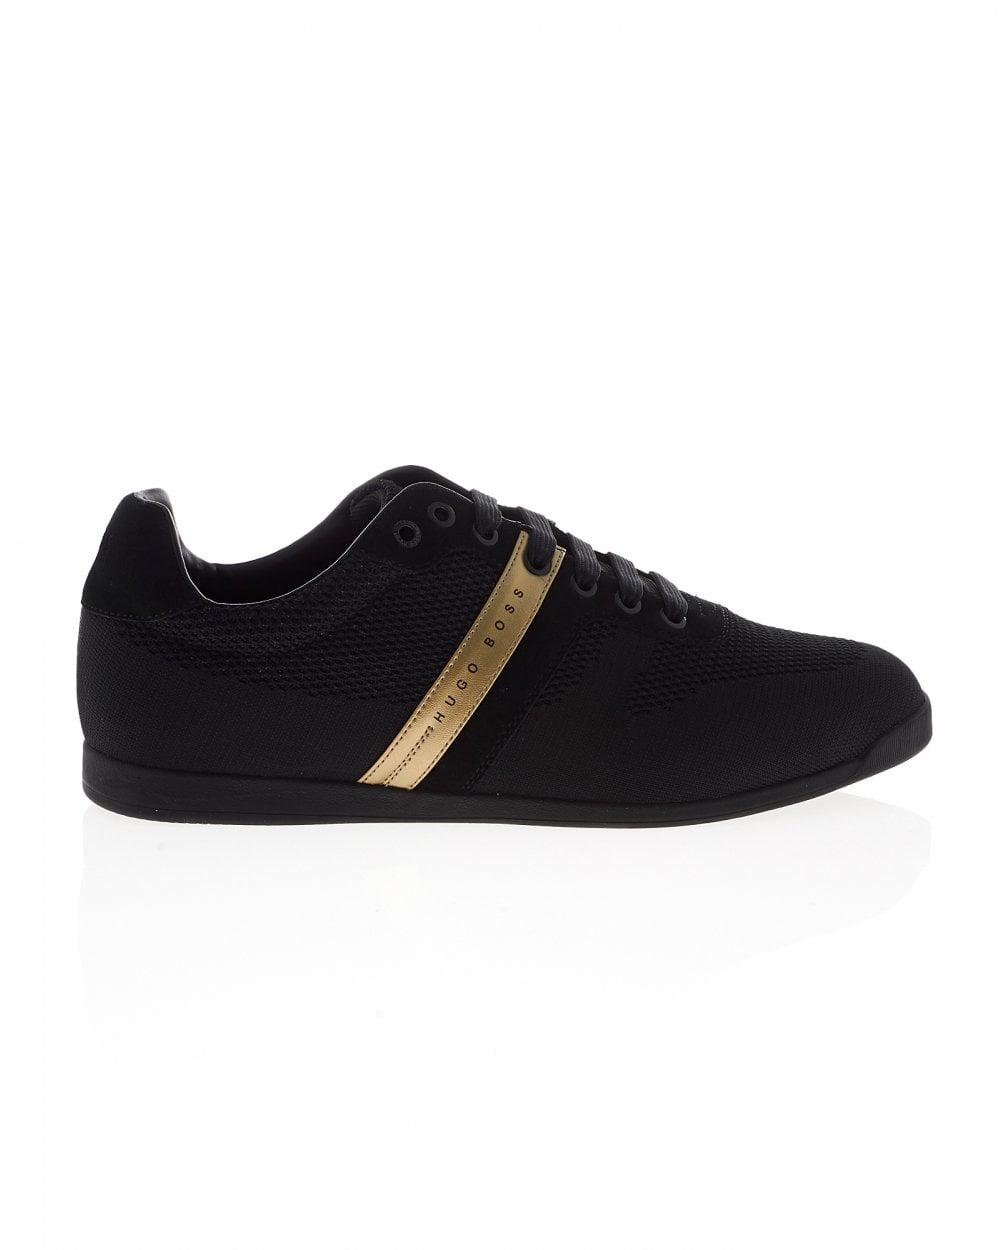 hugo boss black and gold trainers